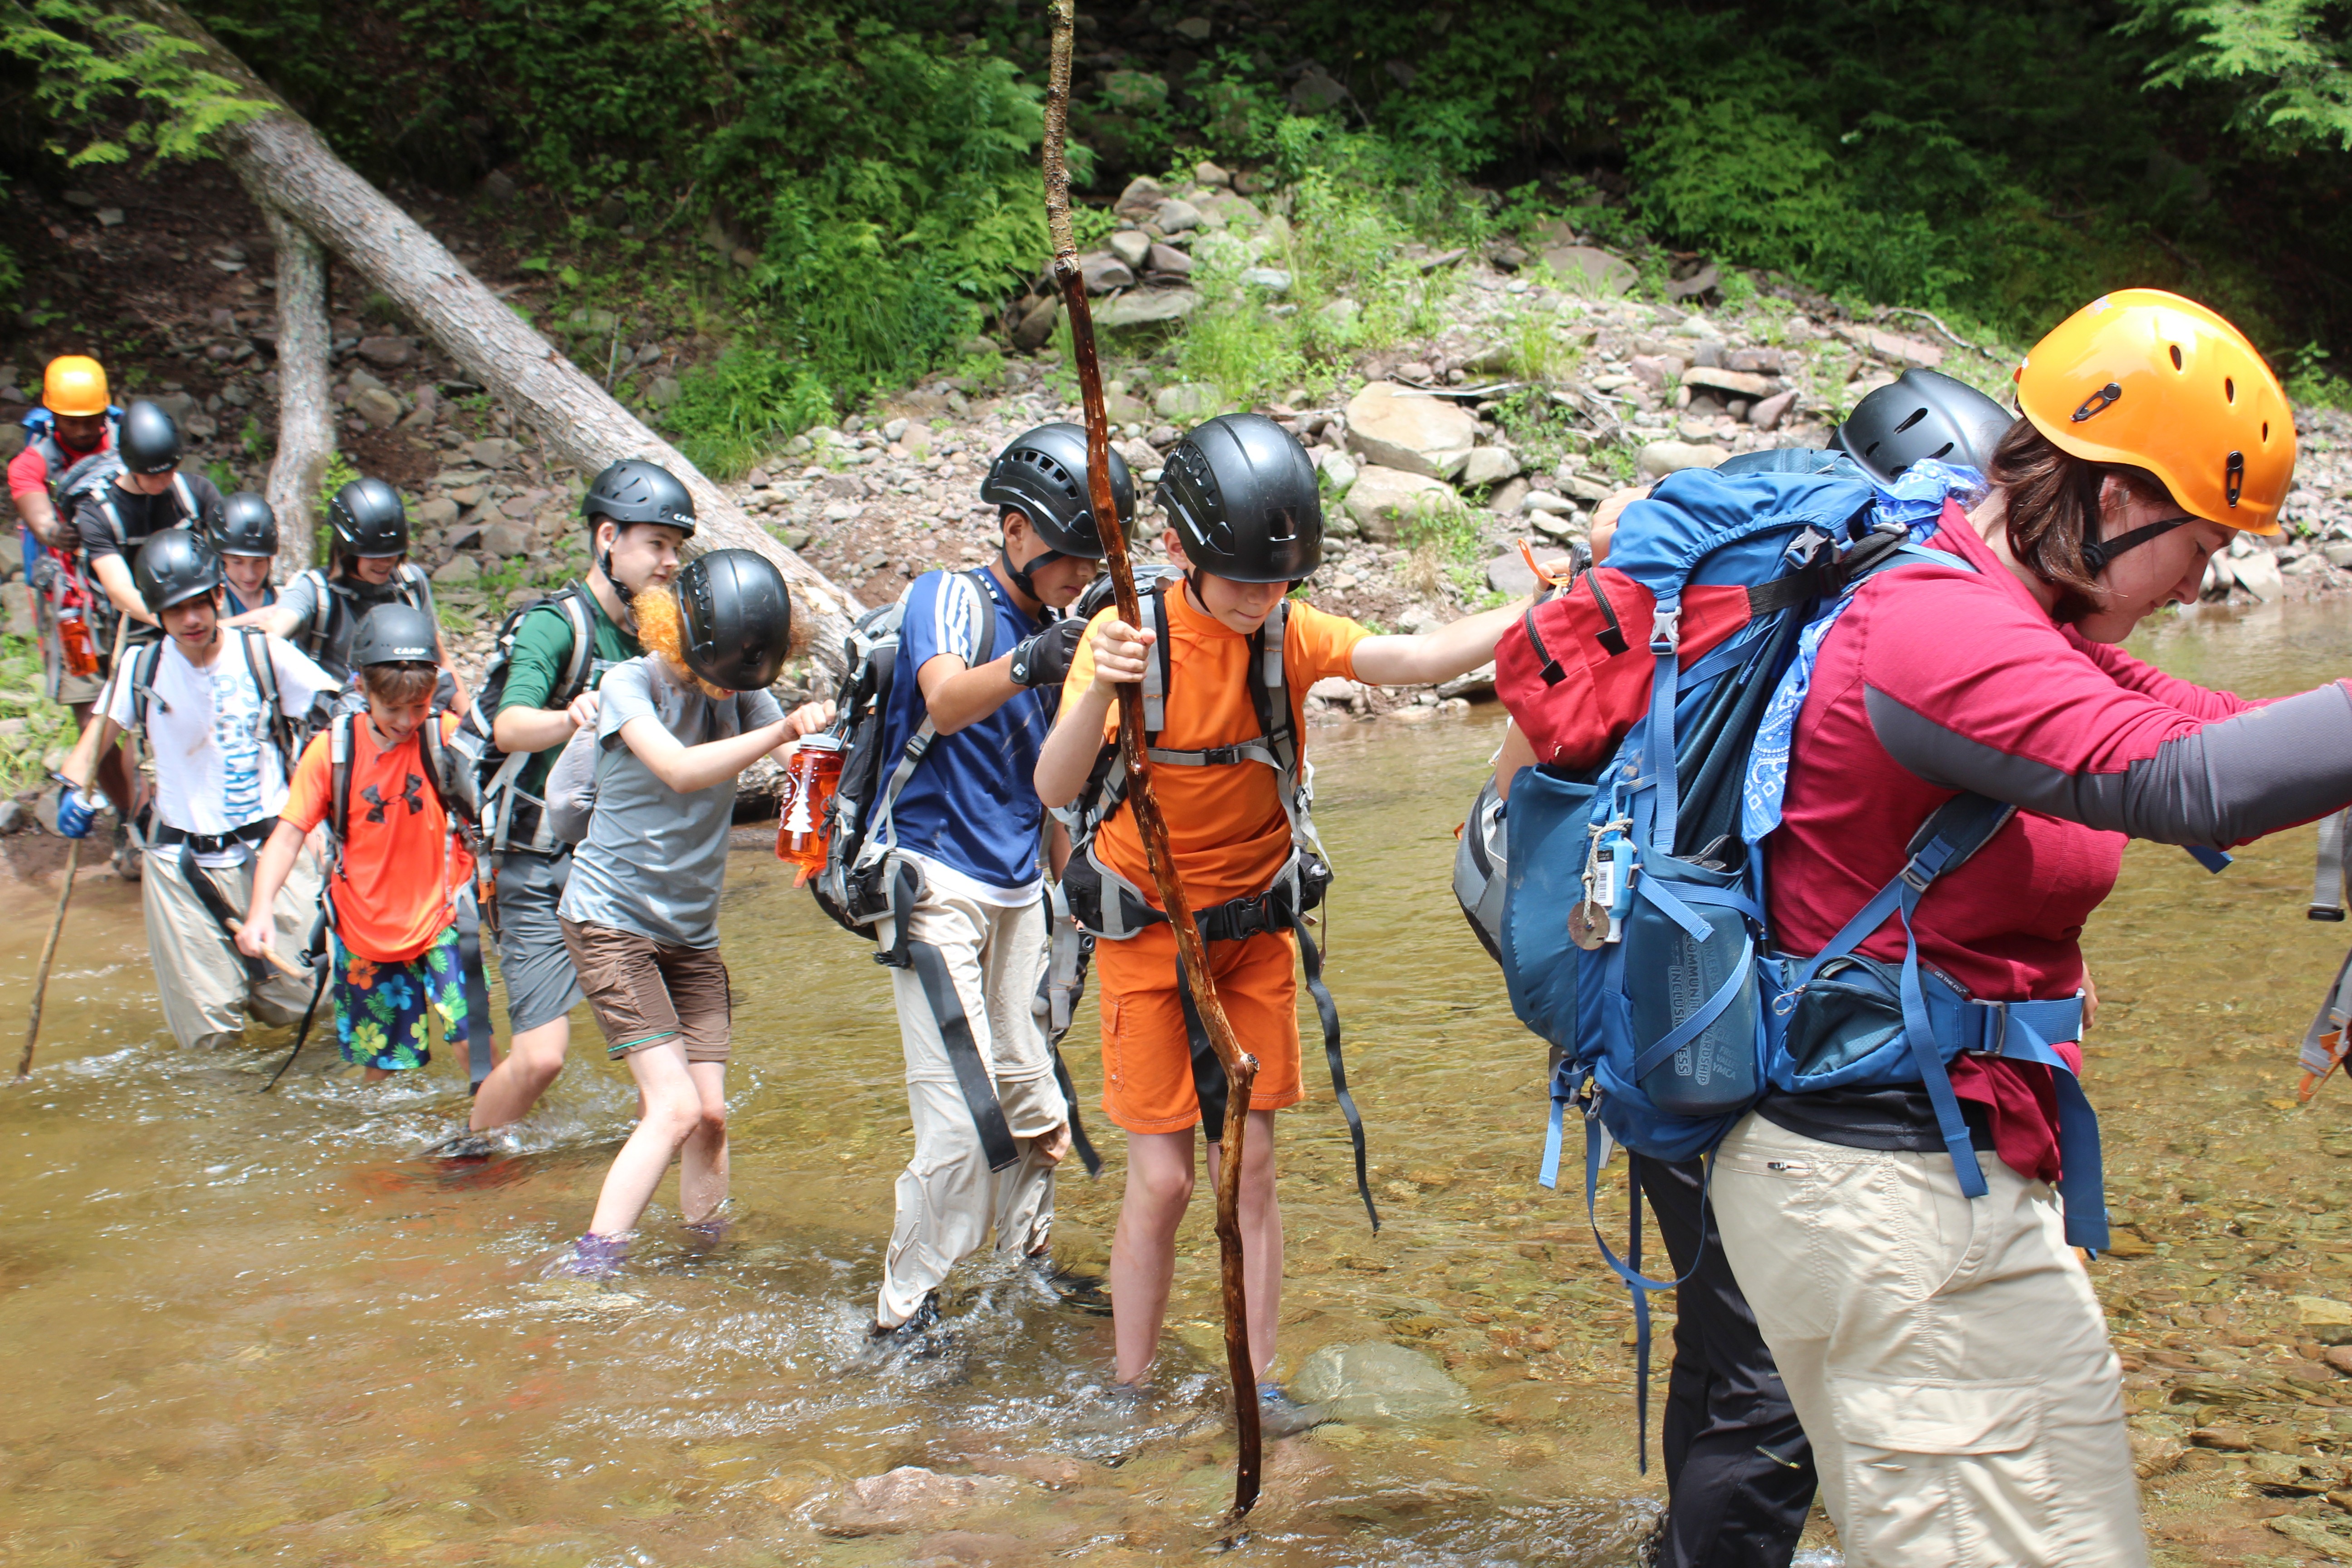 A New Survival Academy Summer Camp at Frost Valley YMCA Daily Dose